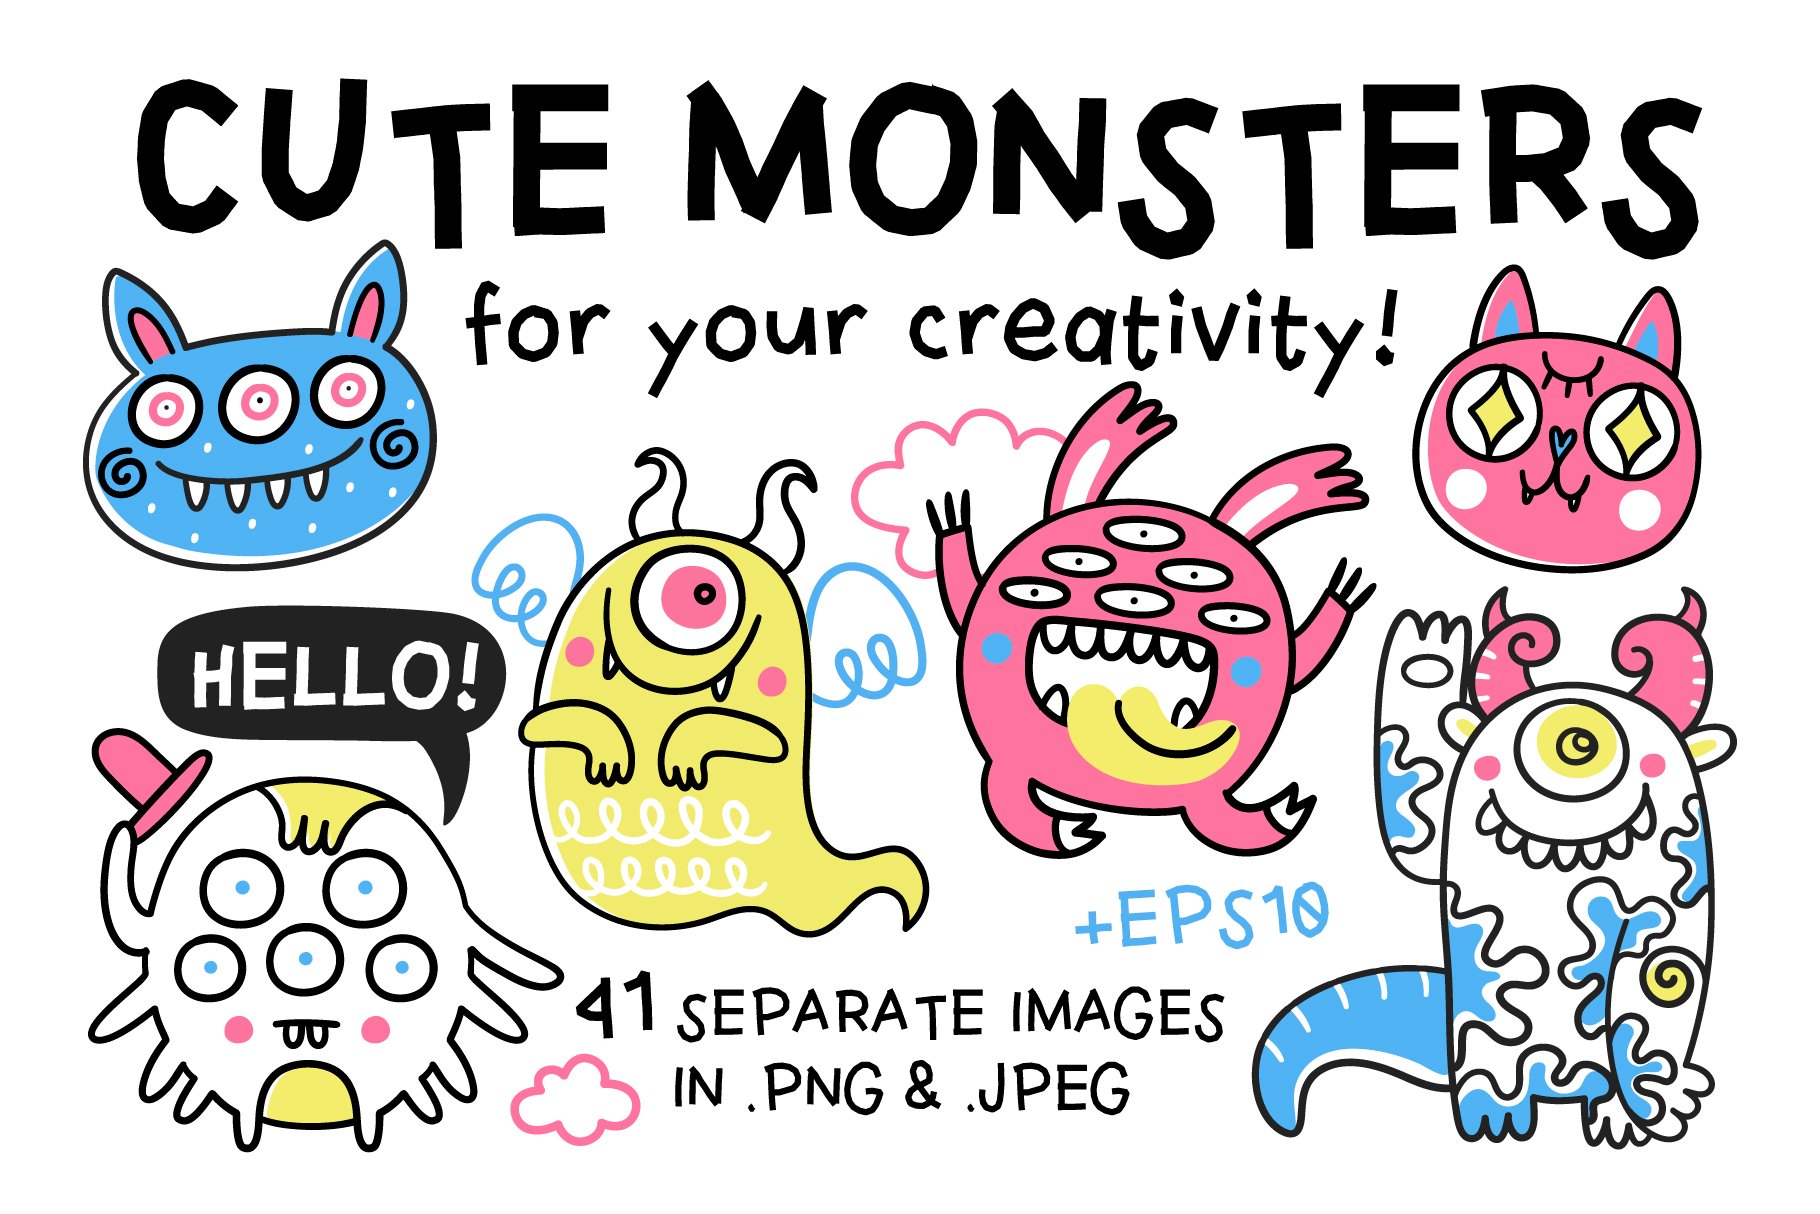 Cute monsters collection cover image.